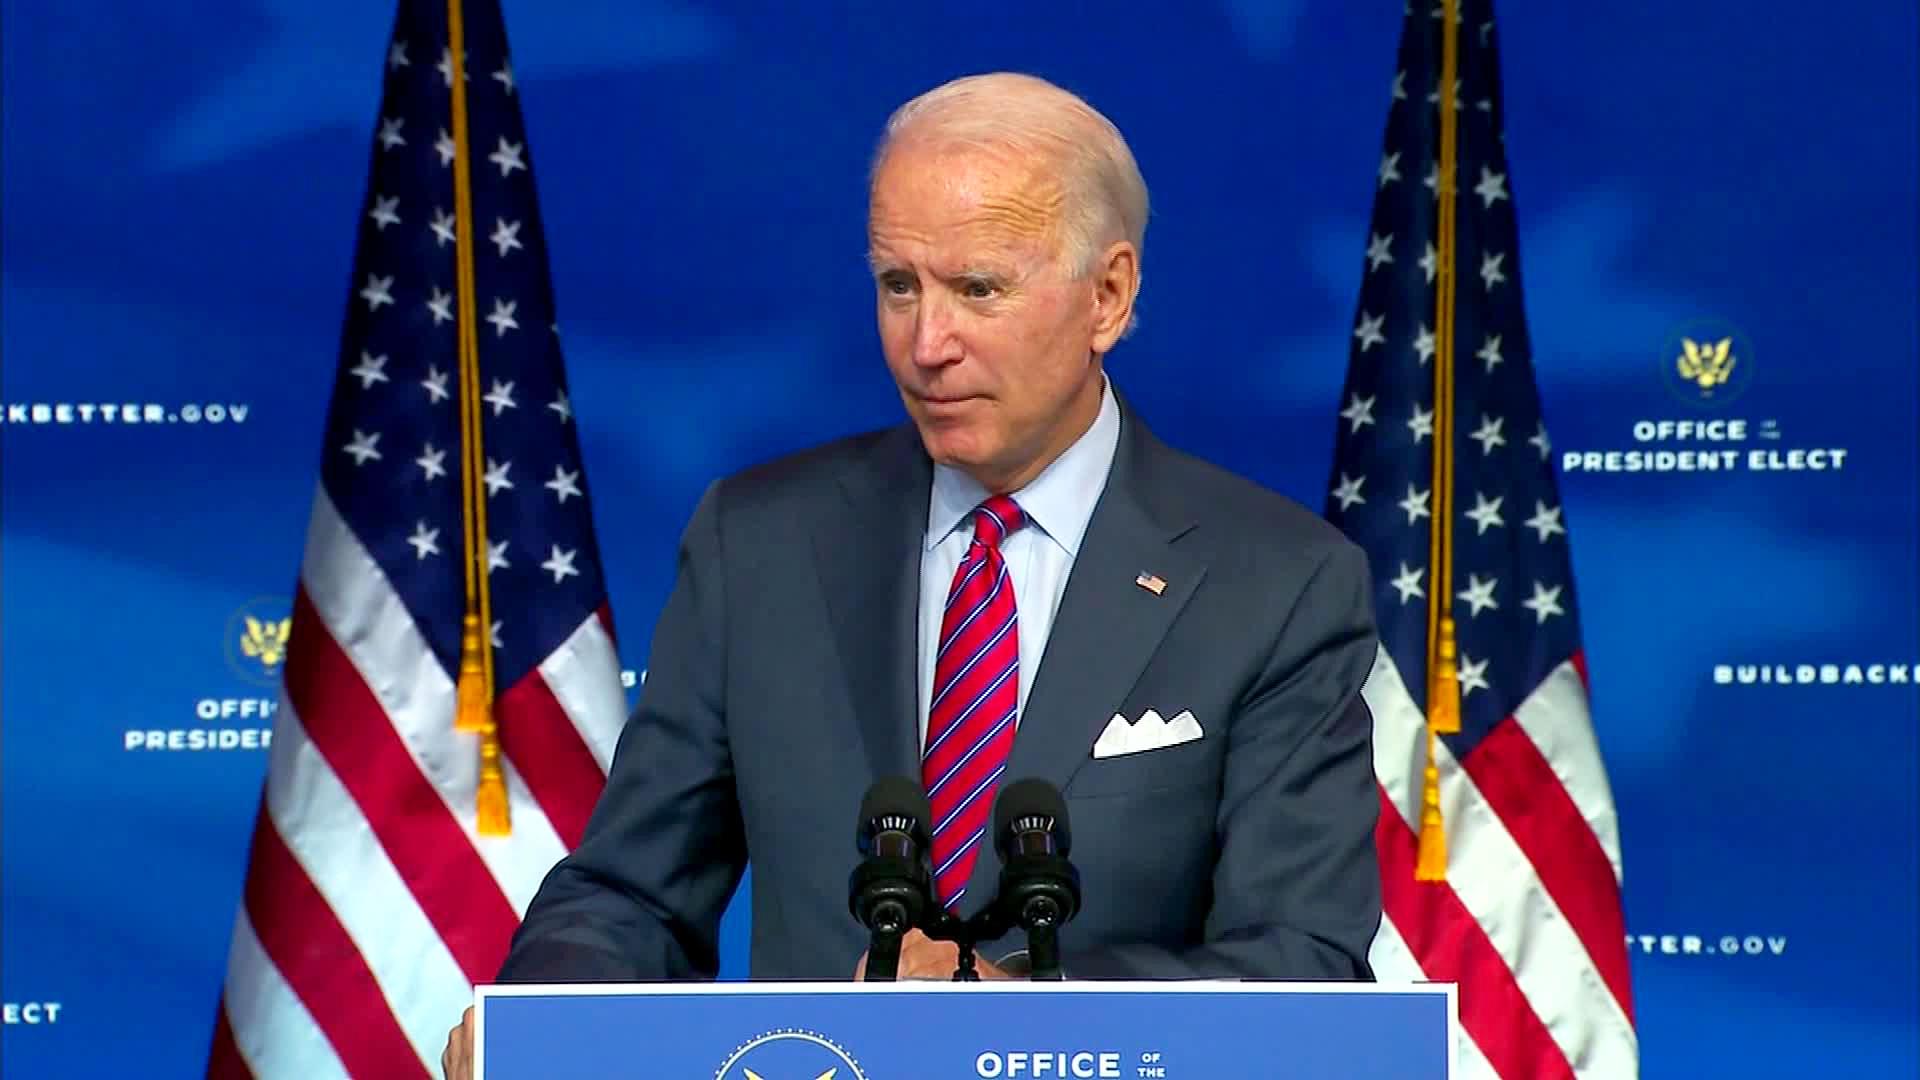 President Biden is Recovering From COVID-19